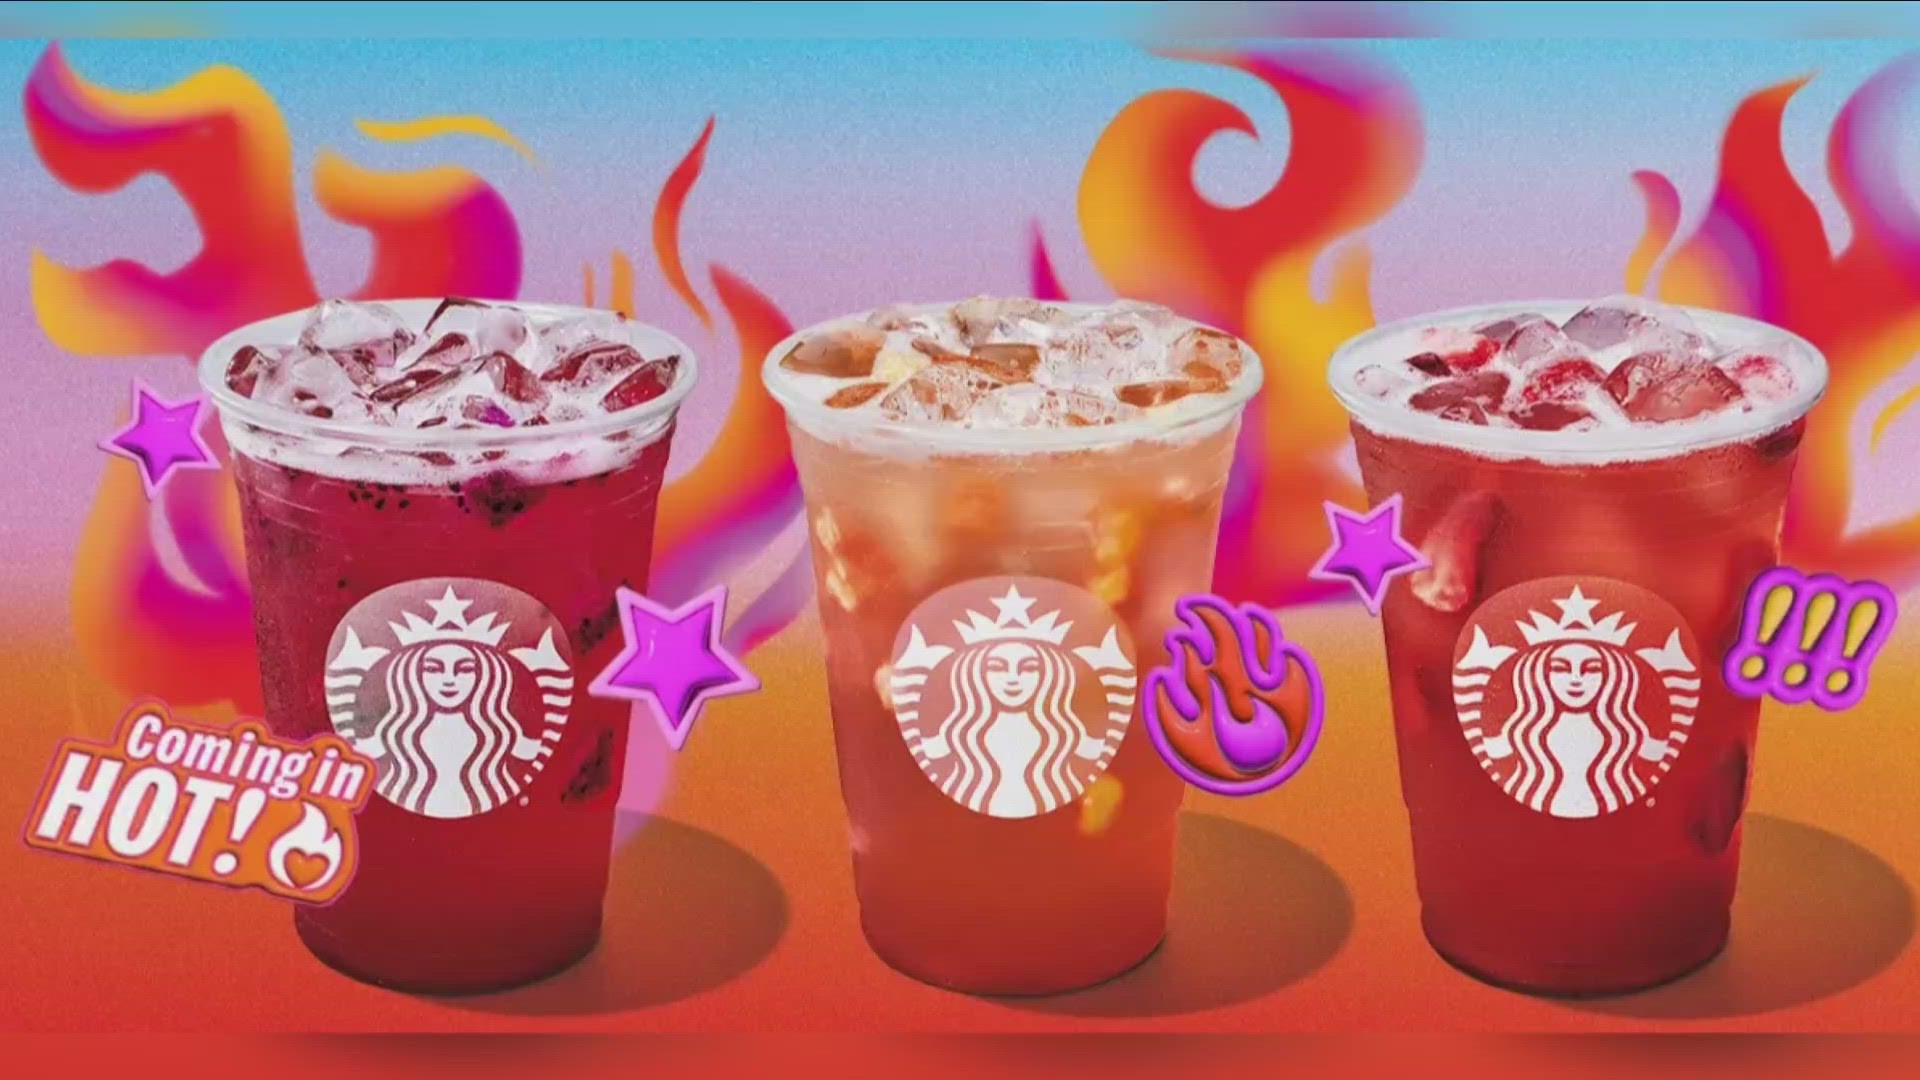 Starbucks rolls out 3 new spicy drink flavors